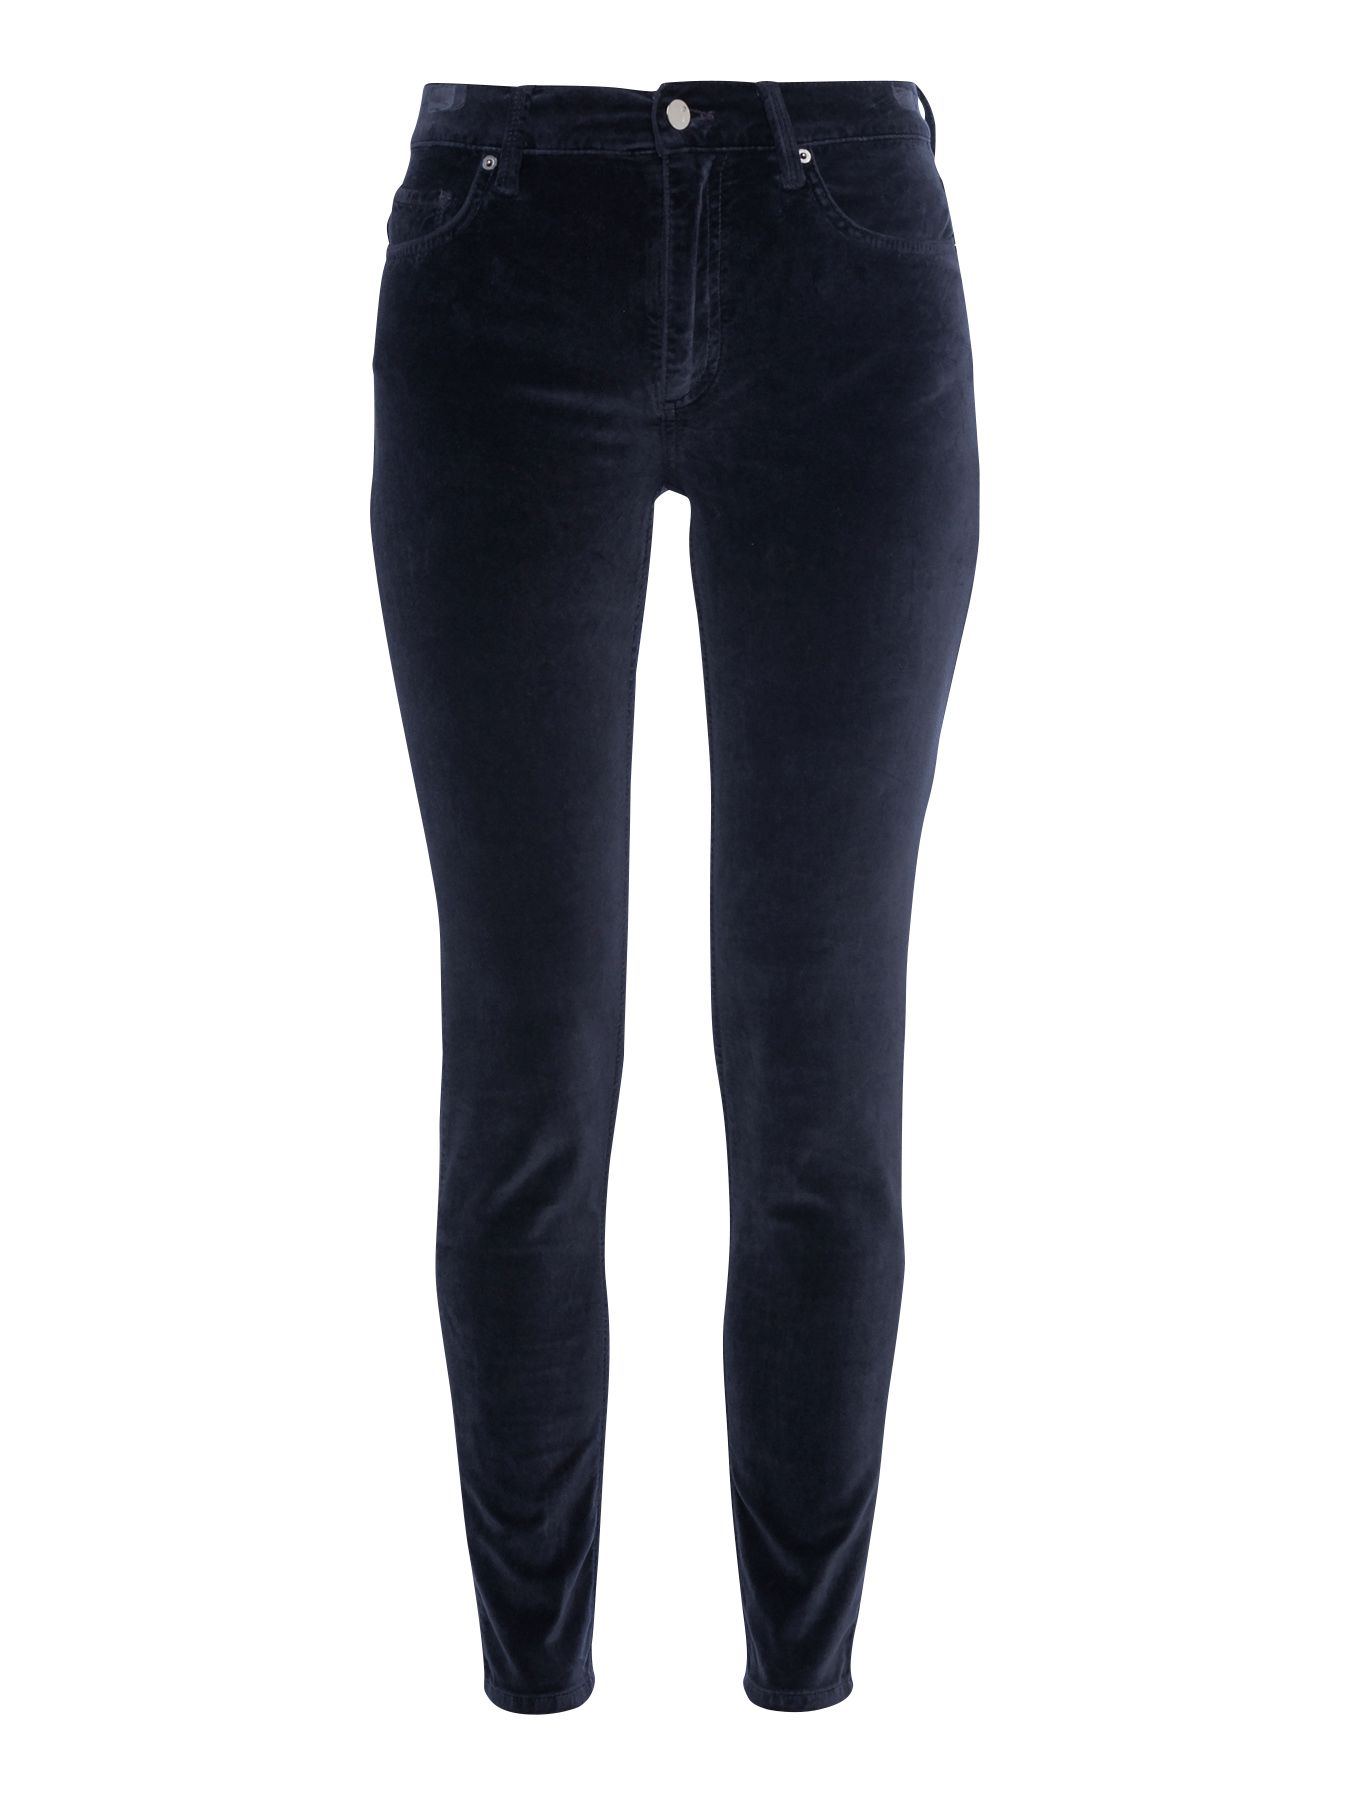 French Connection Velvet Luxe Skinny Trousers